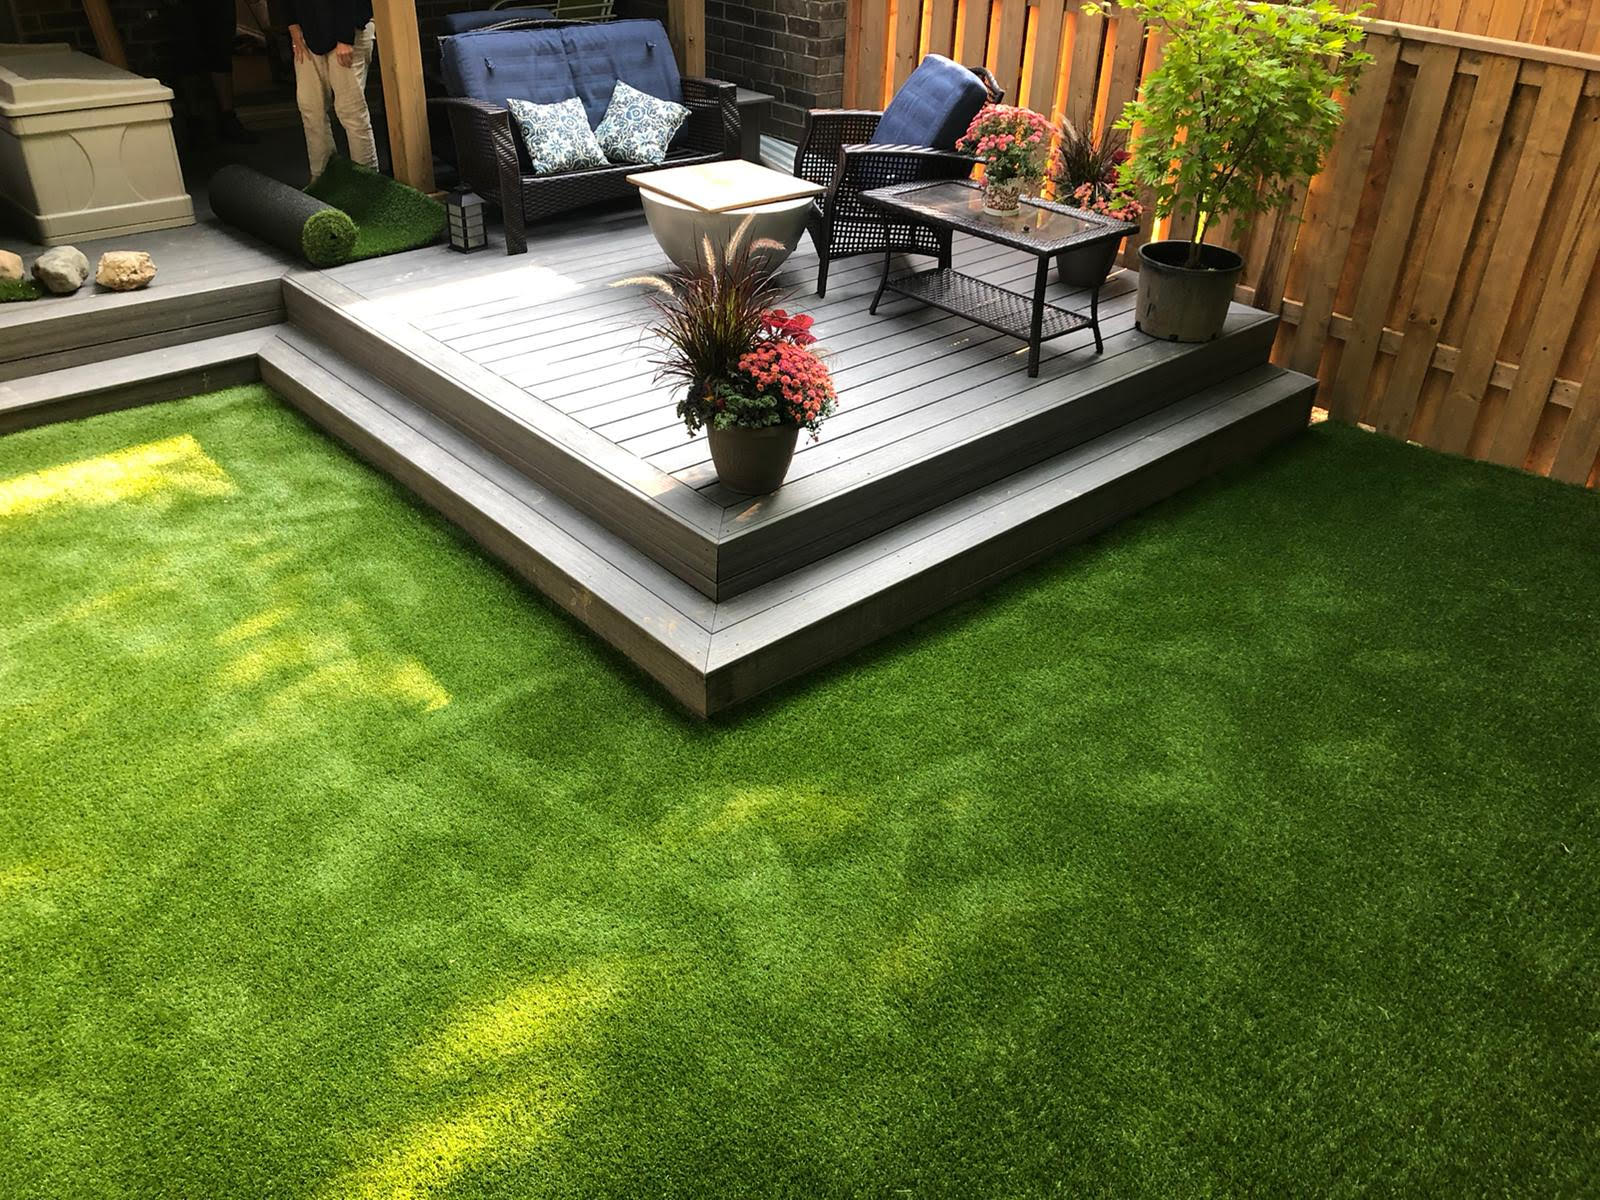 5 Key Considerations Before Installing Artificial Grass on Your Wooden Deck